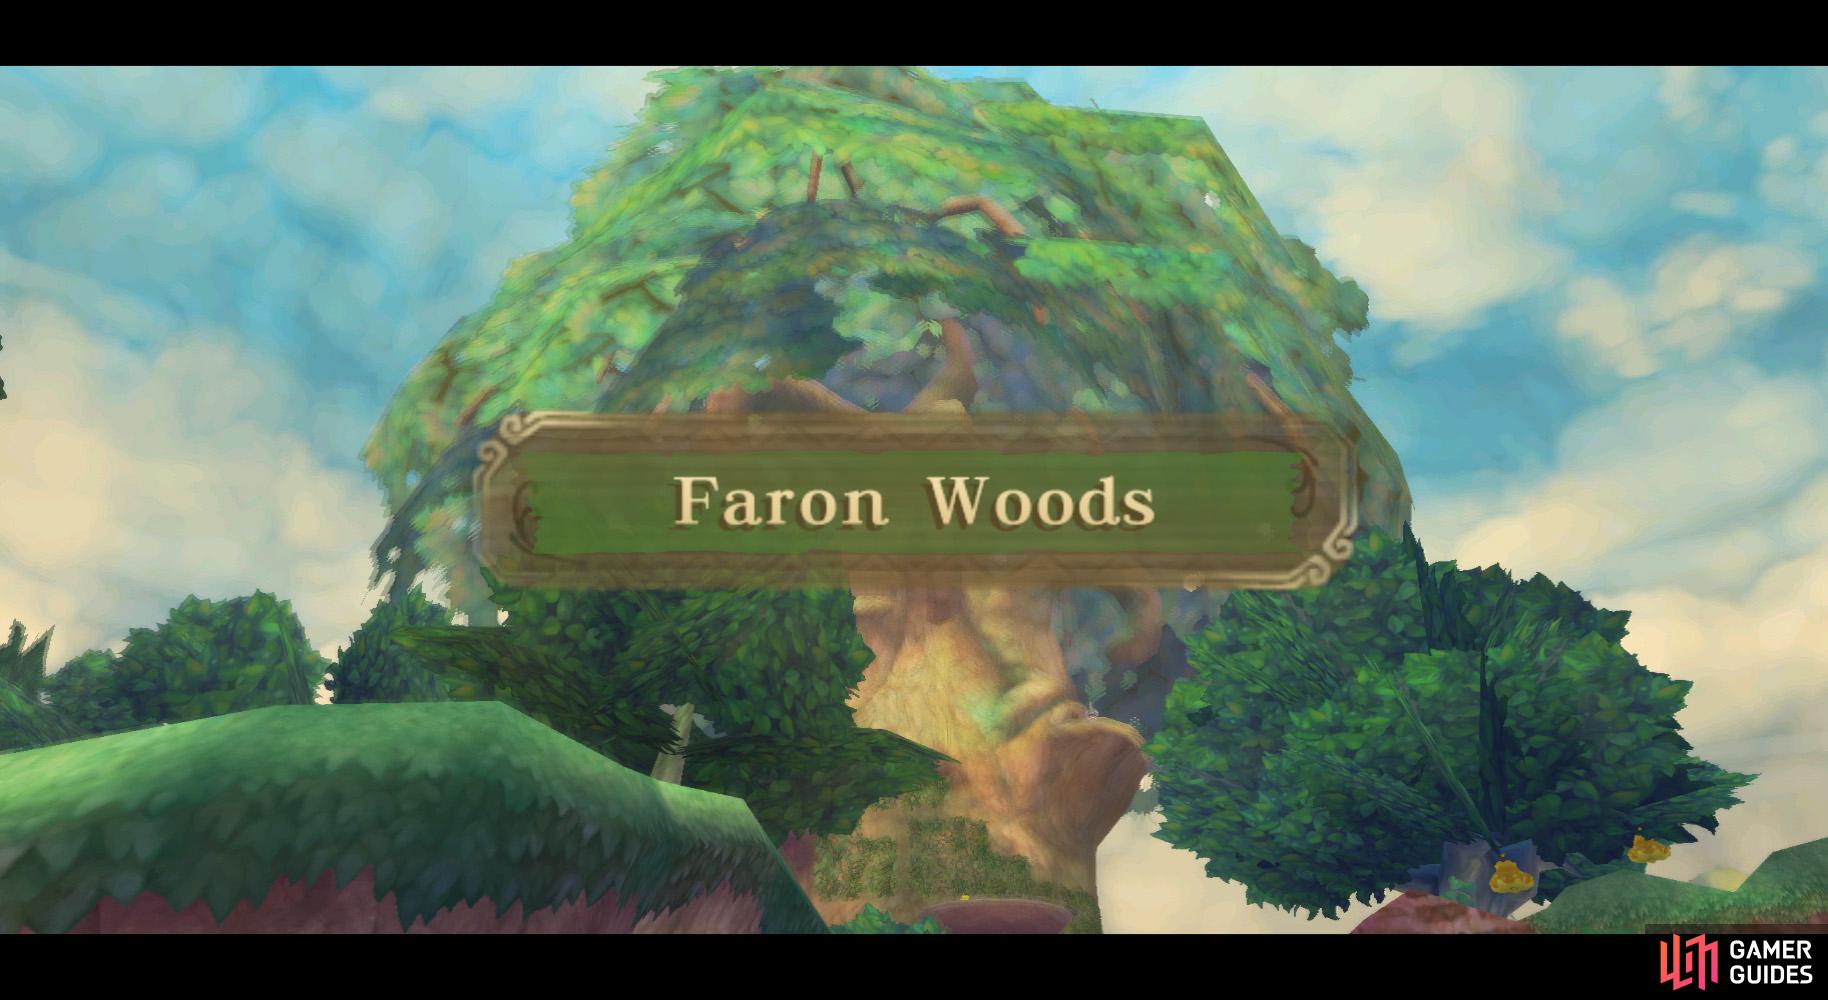 Faron Woods is the first main region in the game.